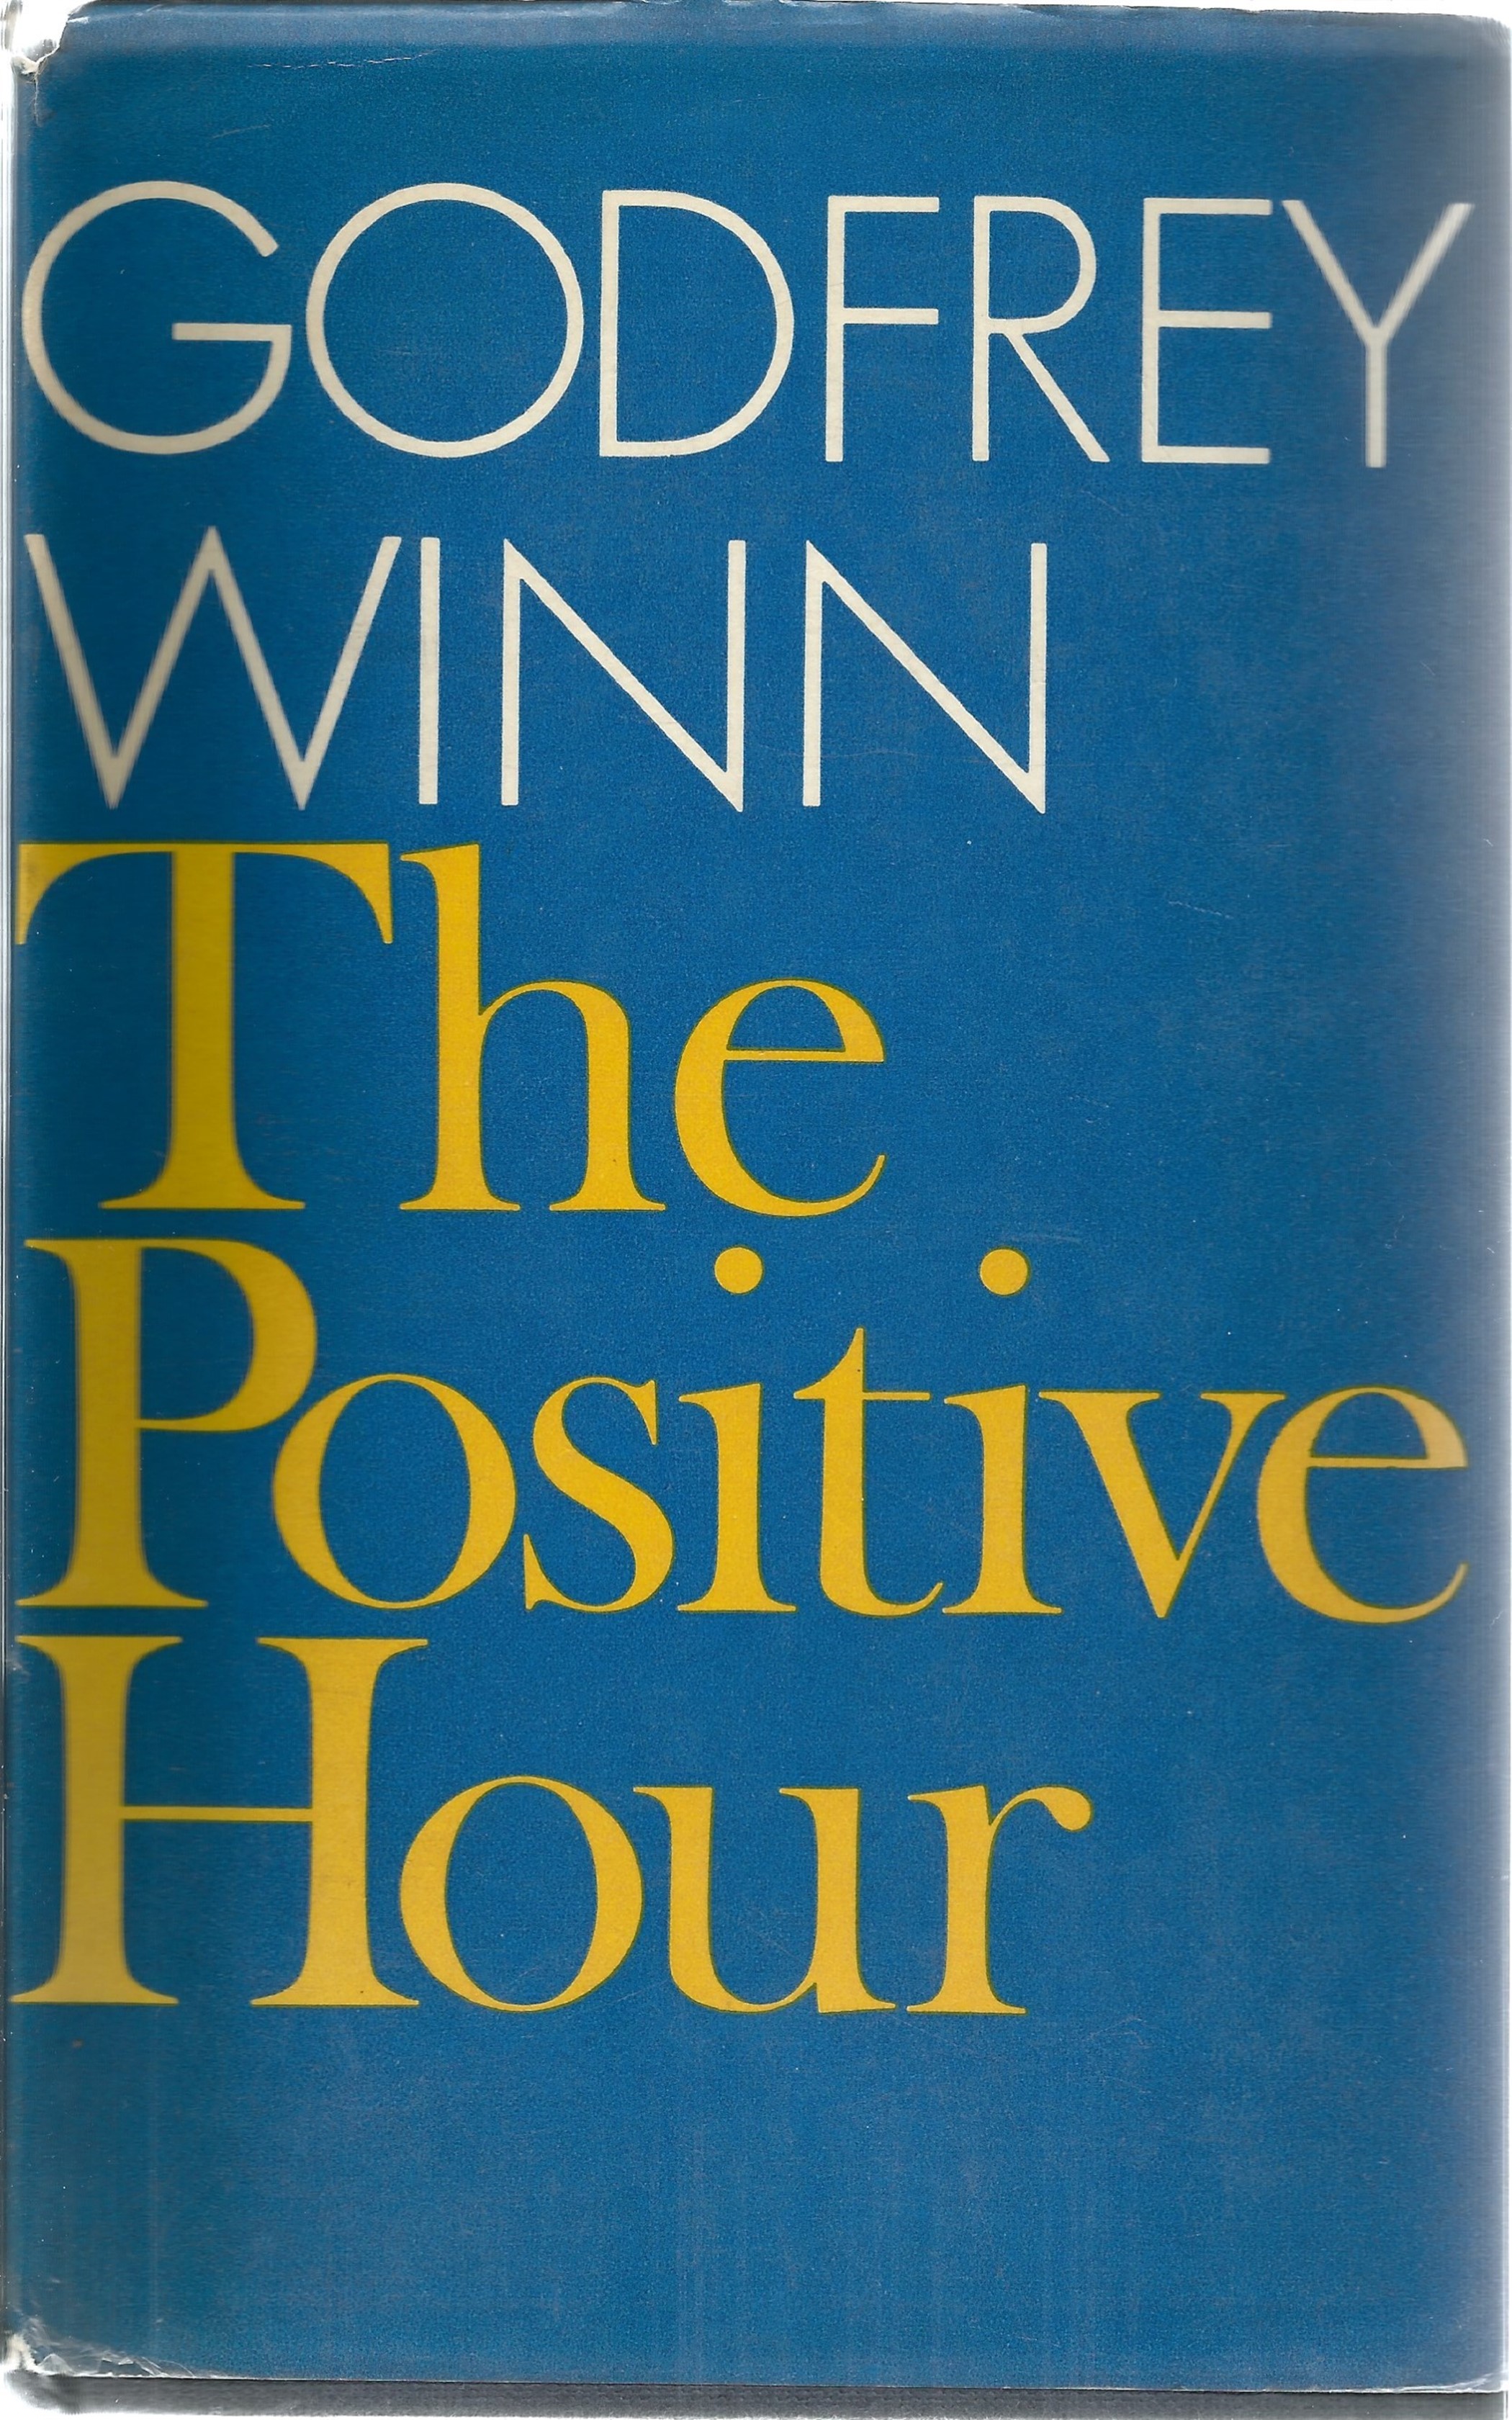 Godfrey Winn. The Positive Hour. WW2 First Edition hardback book, in fair condition. Signed by the - Image 3 of 4